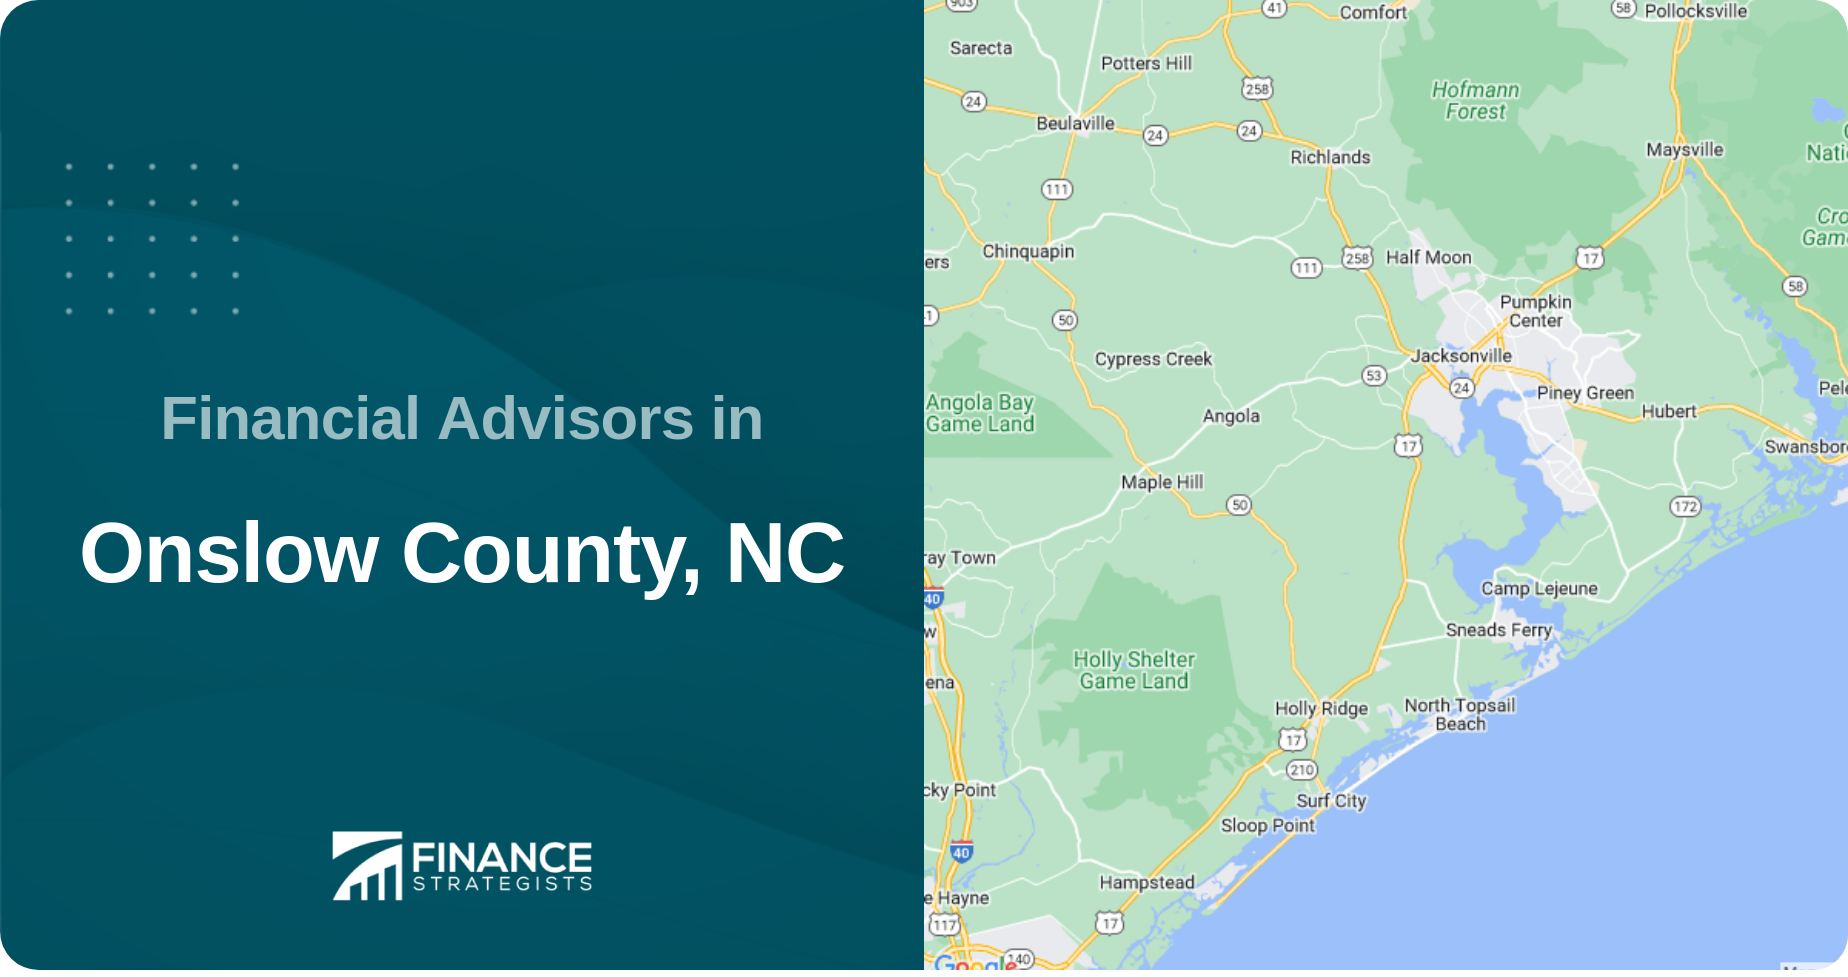 Financial Advisors in Onslow County, NC